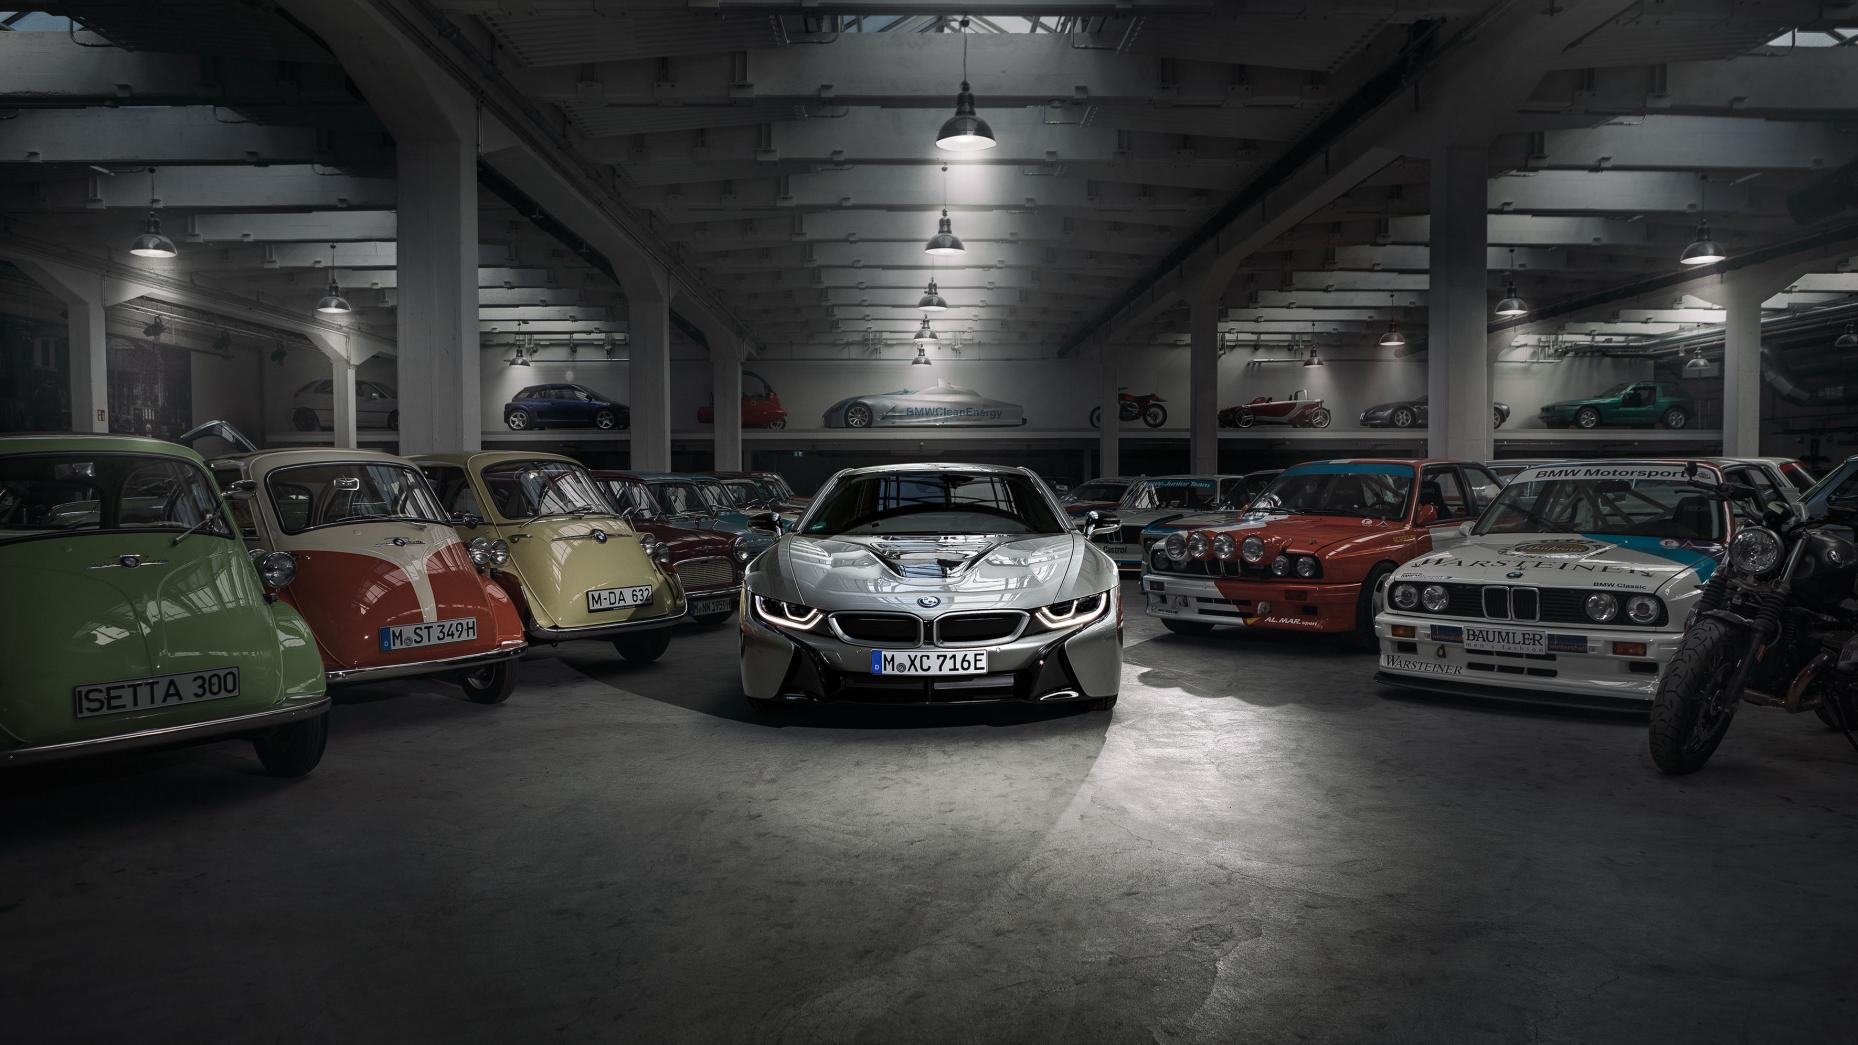 Topgear Gallery The Bmw I8 Meets Some Of The Best Looking Bmws